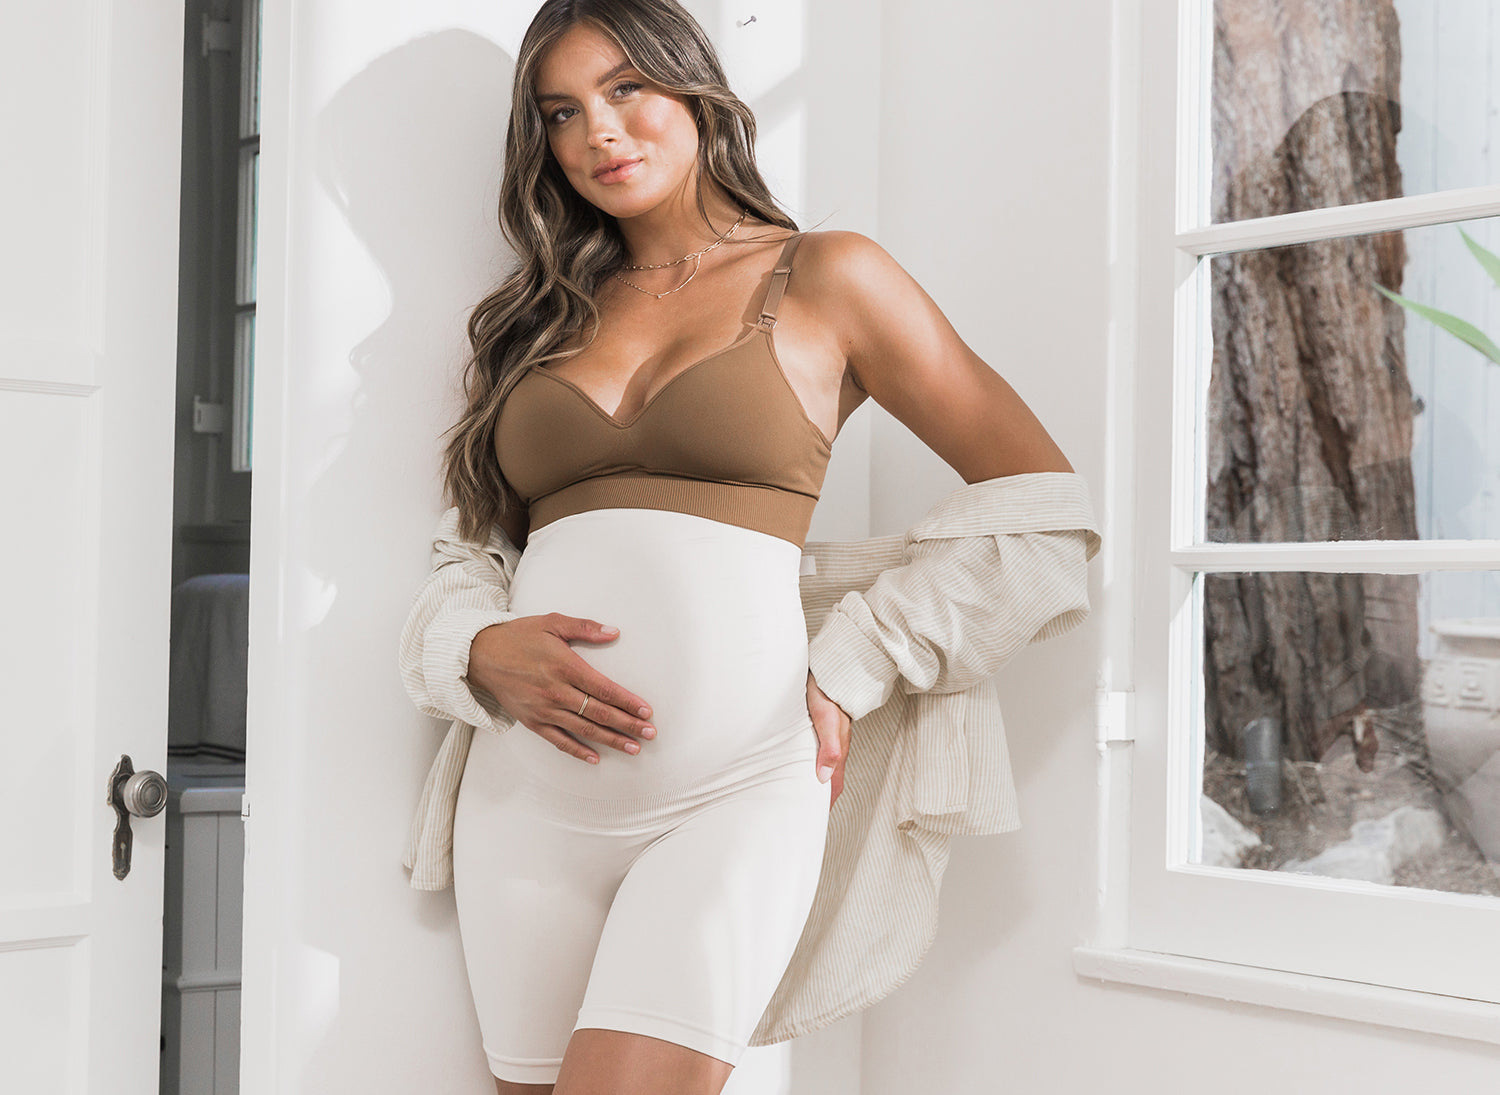 Blanqi belly support maternity - Gem